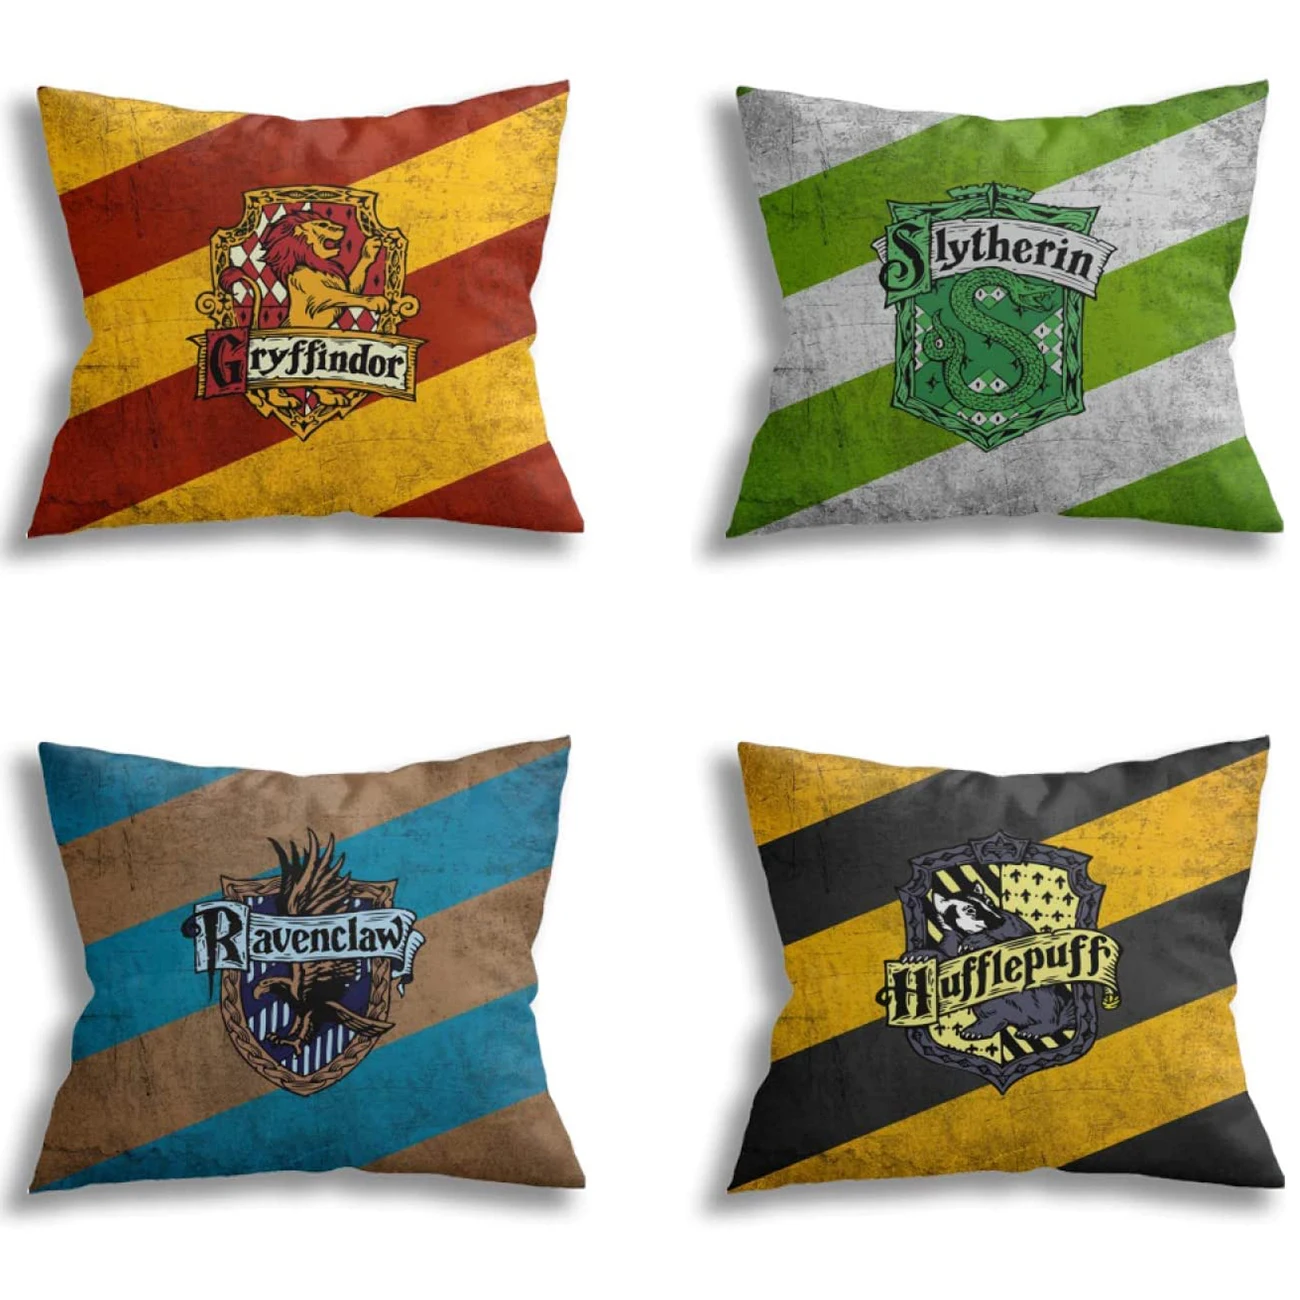 

4pcs Harr HogwartsSchool Po tte Pillowcase Throw Pillow Cover for Boy Double Bed Cushions Pillow cases for Bed Sofa Couch 18x18